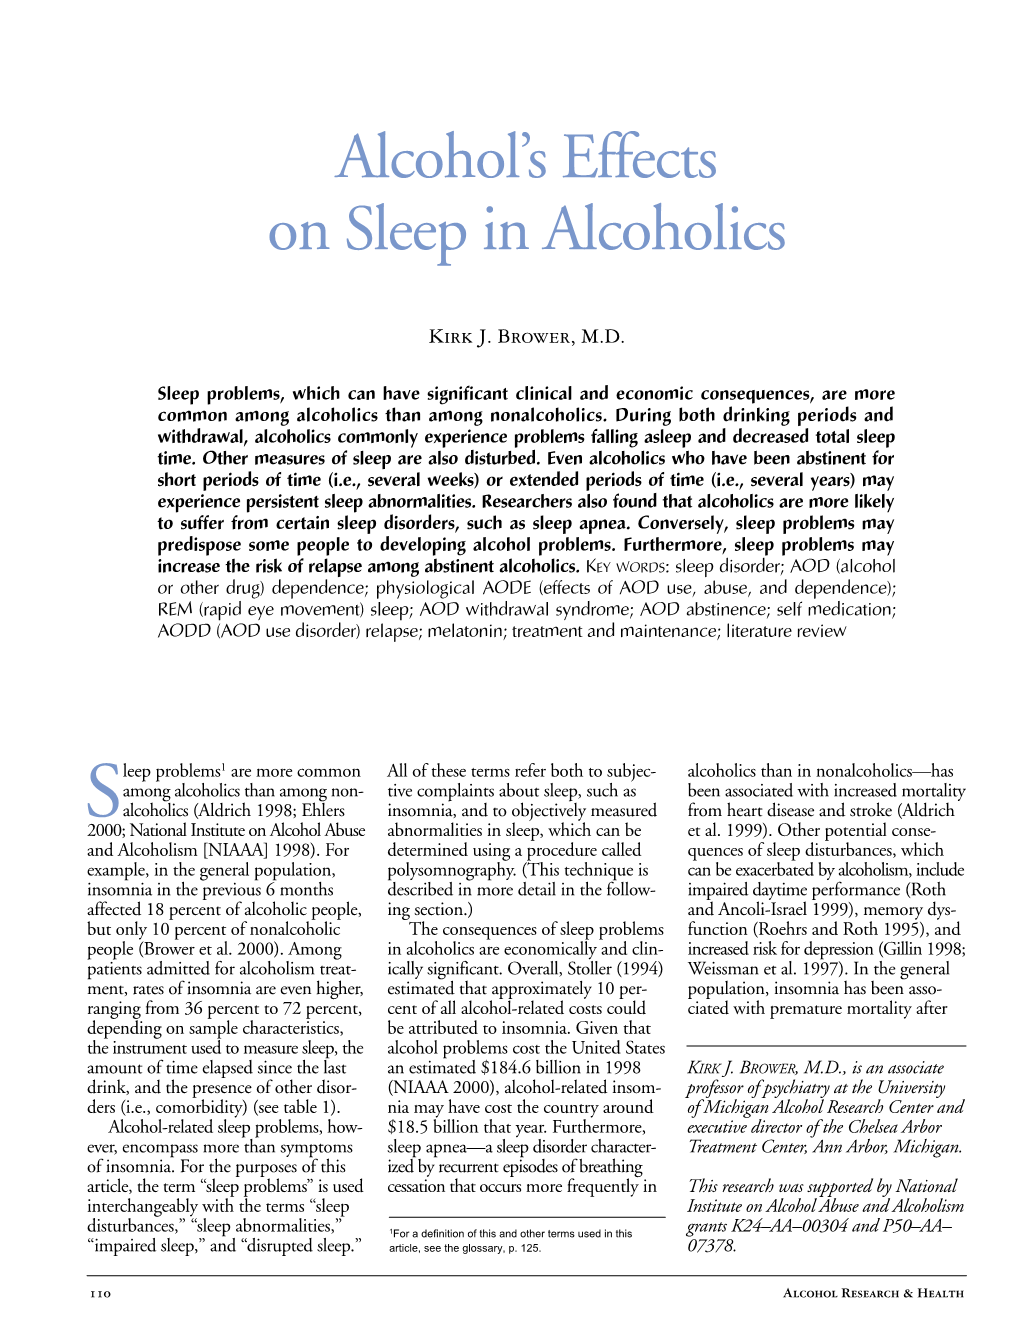 Alcohol's Effects on Sleep in Alcoholics